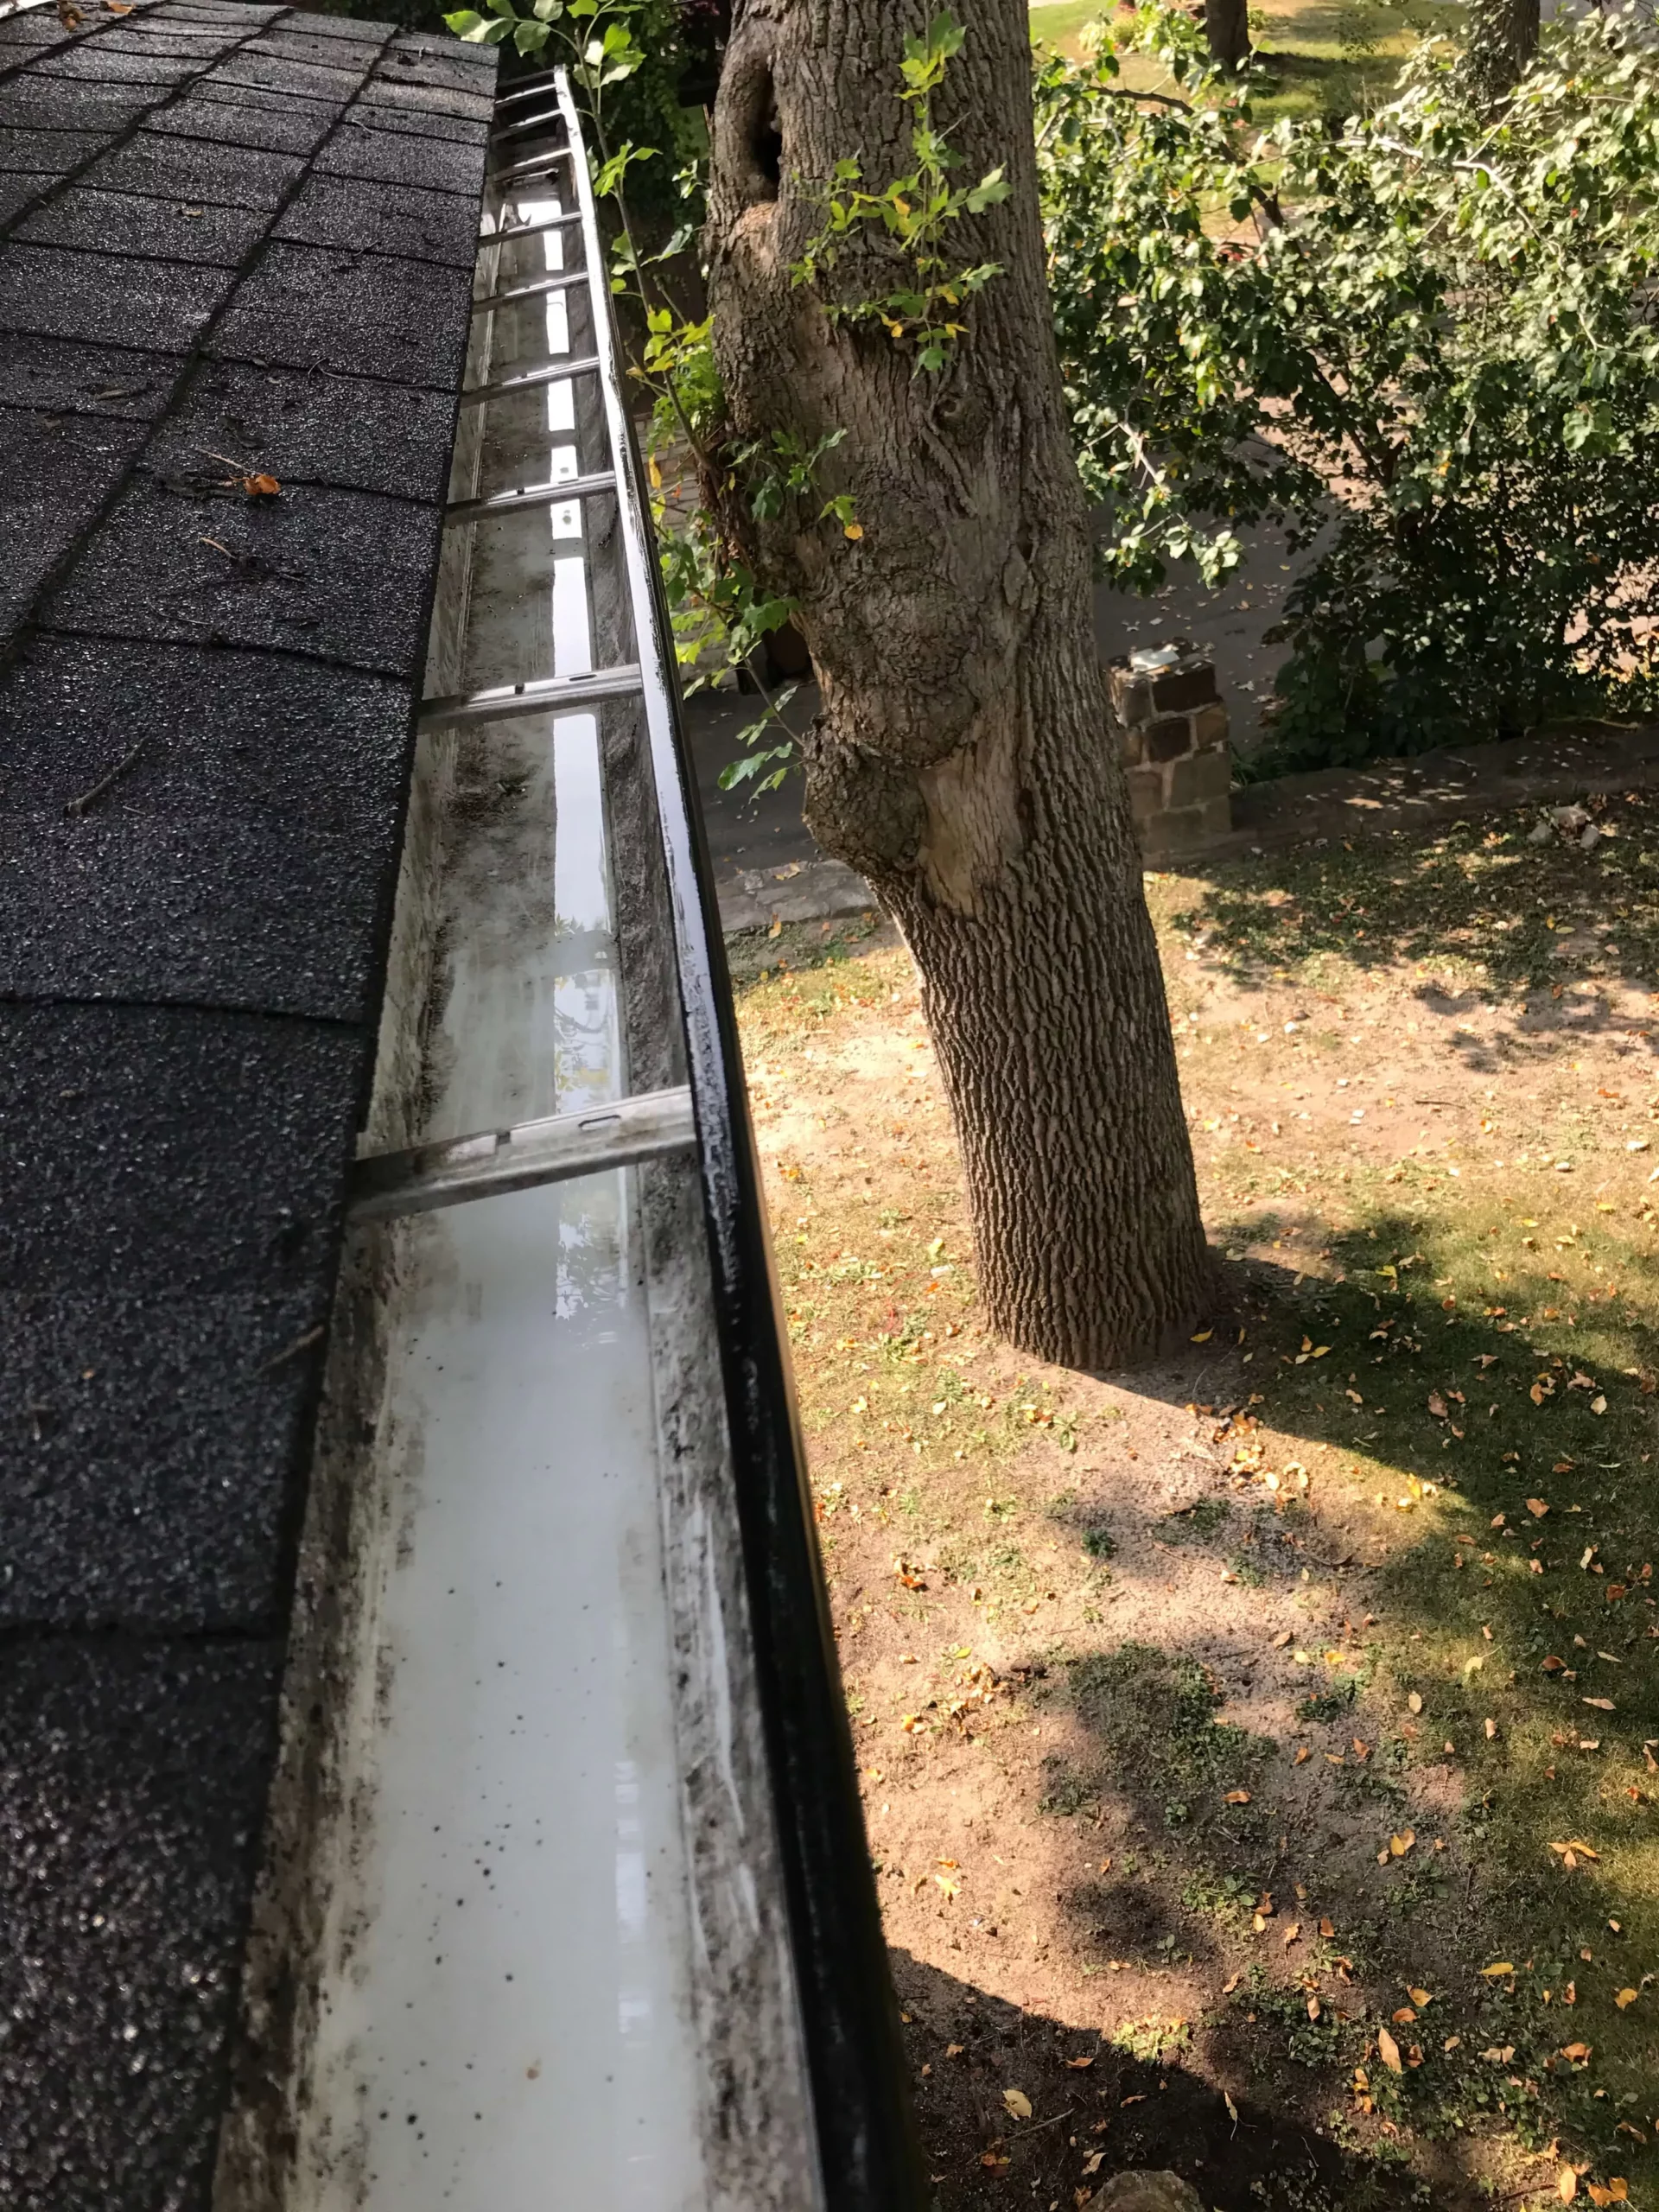 Gutter cleaning on the North Shore, Laval and Bois-des-Filion.